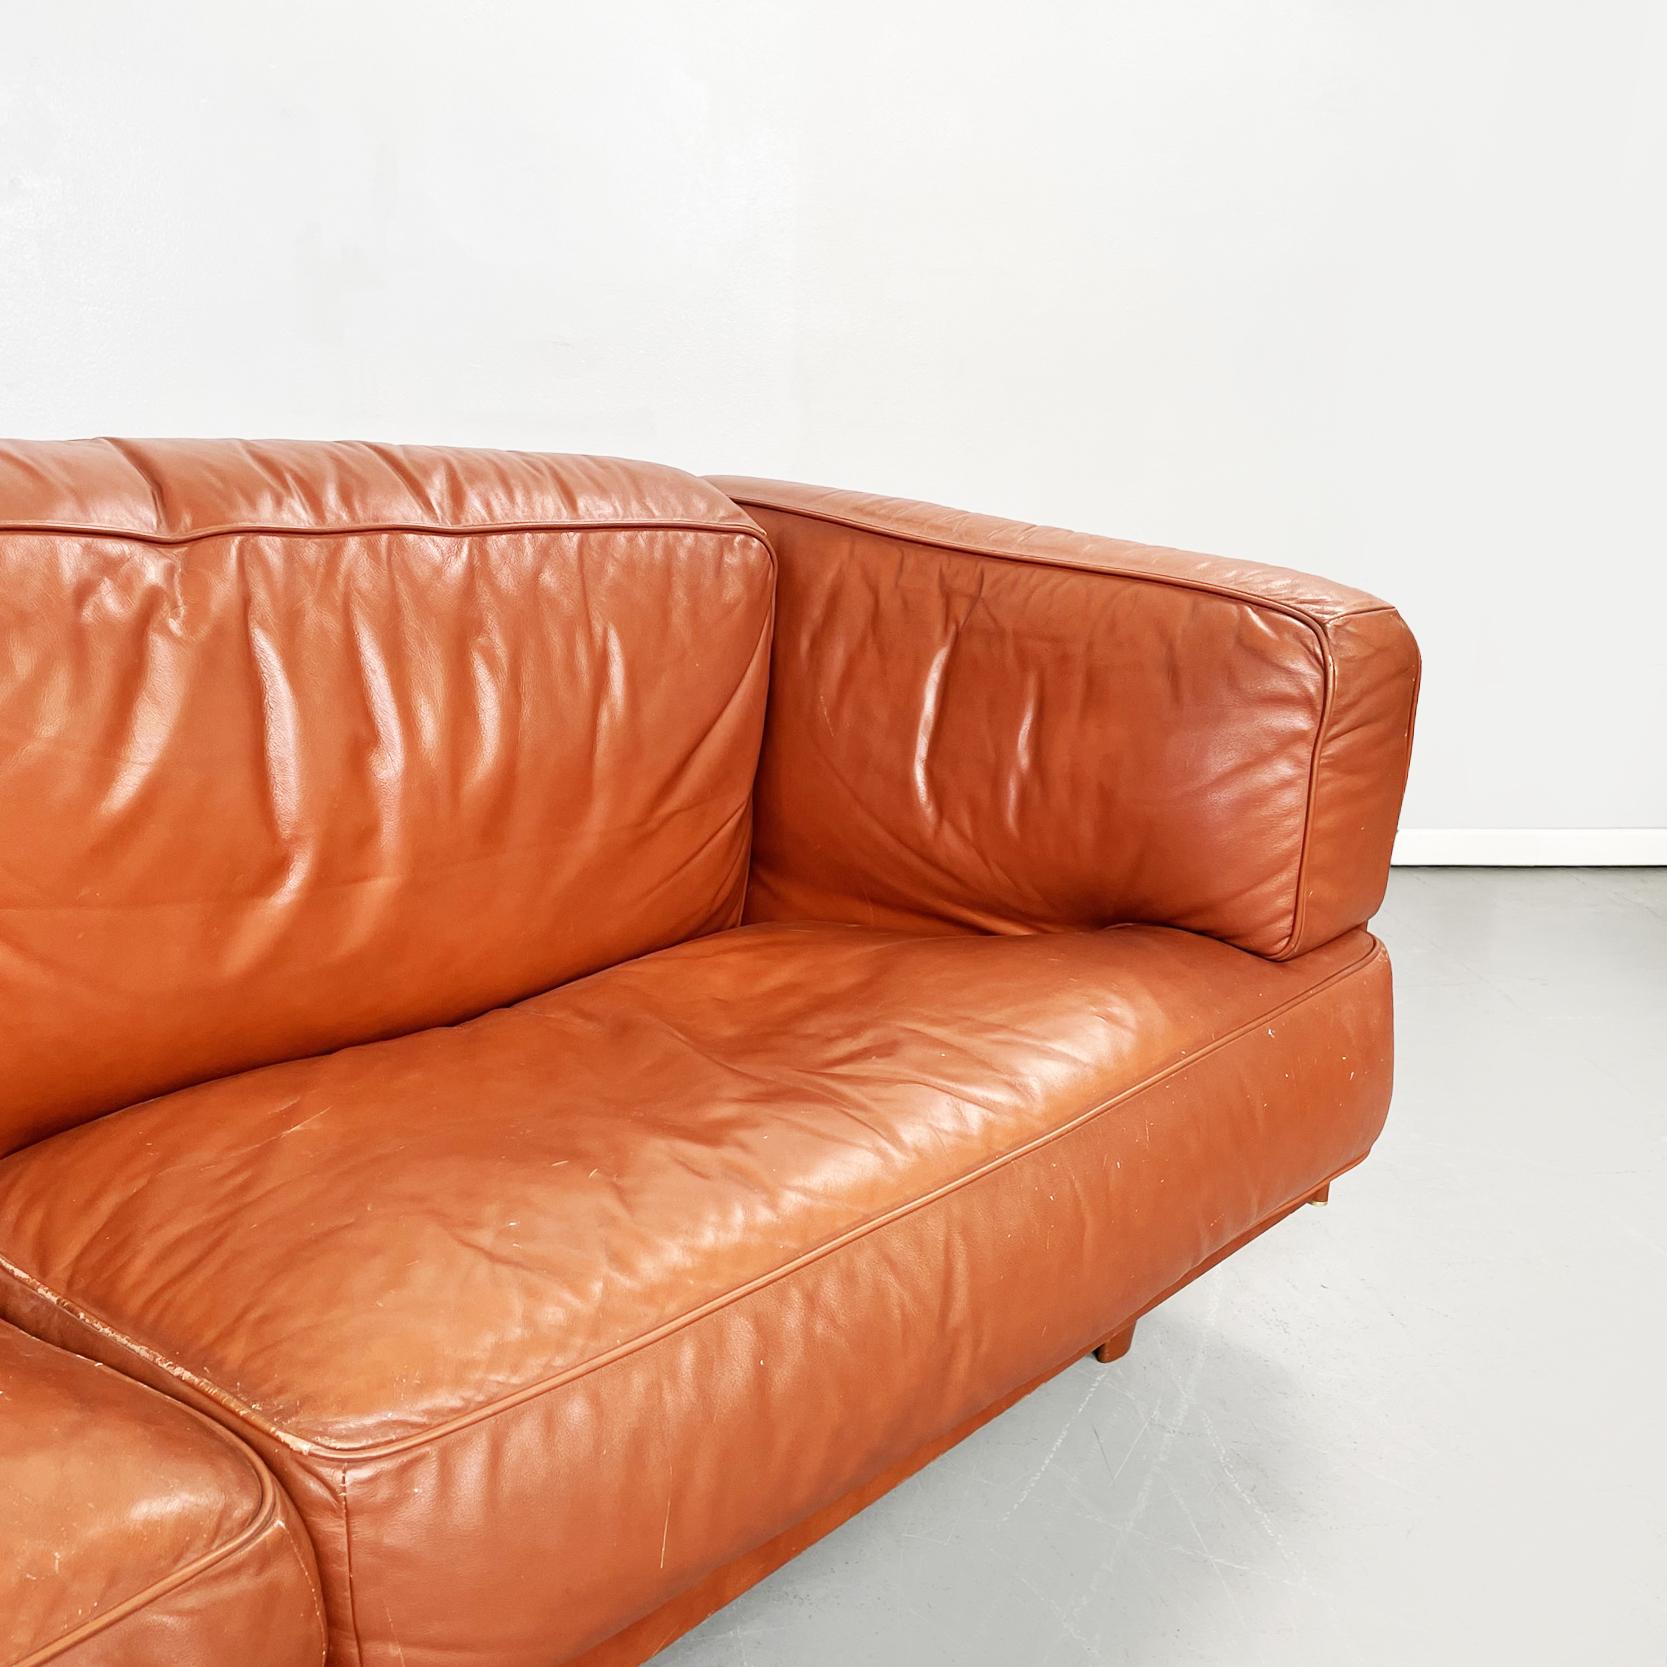 Italian Modern Brown Leather Sofa Twice by Cerri for Poltrona Frau, 1980s In Good Condition For Sale In MIlano, IT